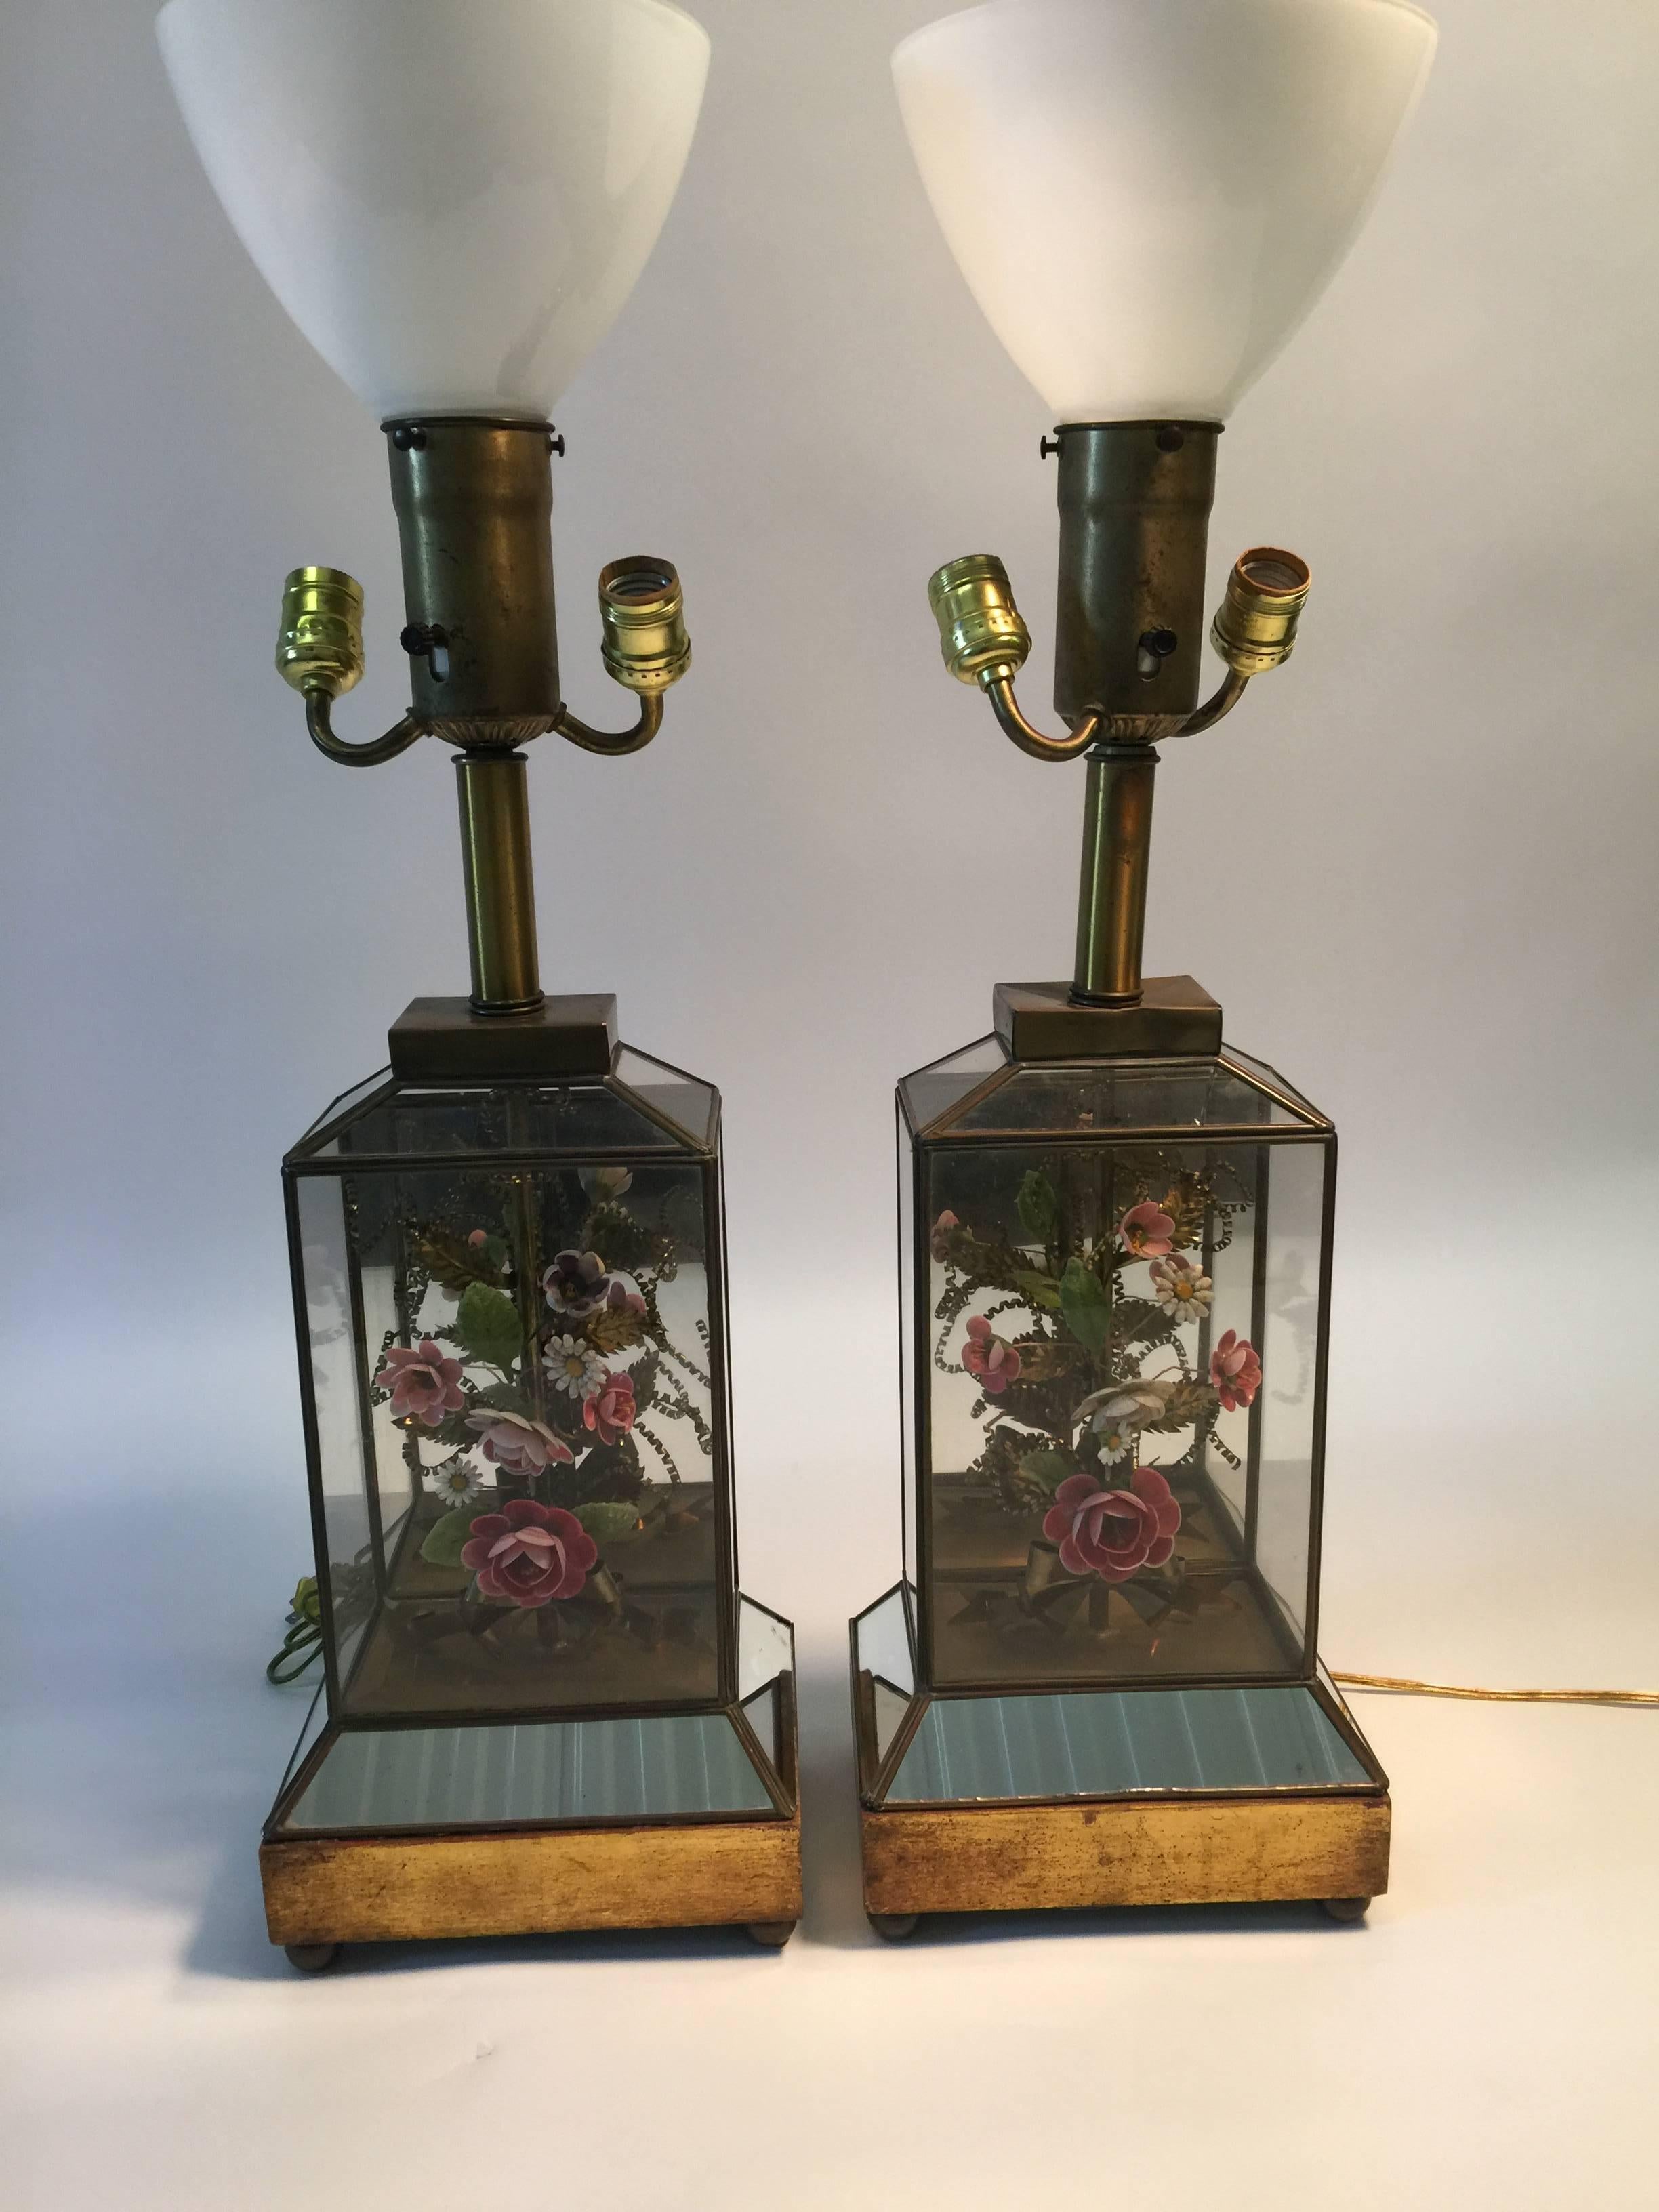  Spectacular Pair of shell and wax flowers with brass leaves and tendrils garnished with a brass sheet metal bow dioramas, encased in glass and brass framed showcases. Standing on a giltwood and mirrored bases these are beautifully made. One lamp